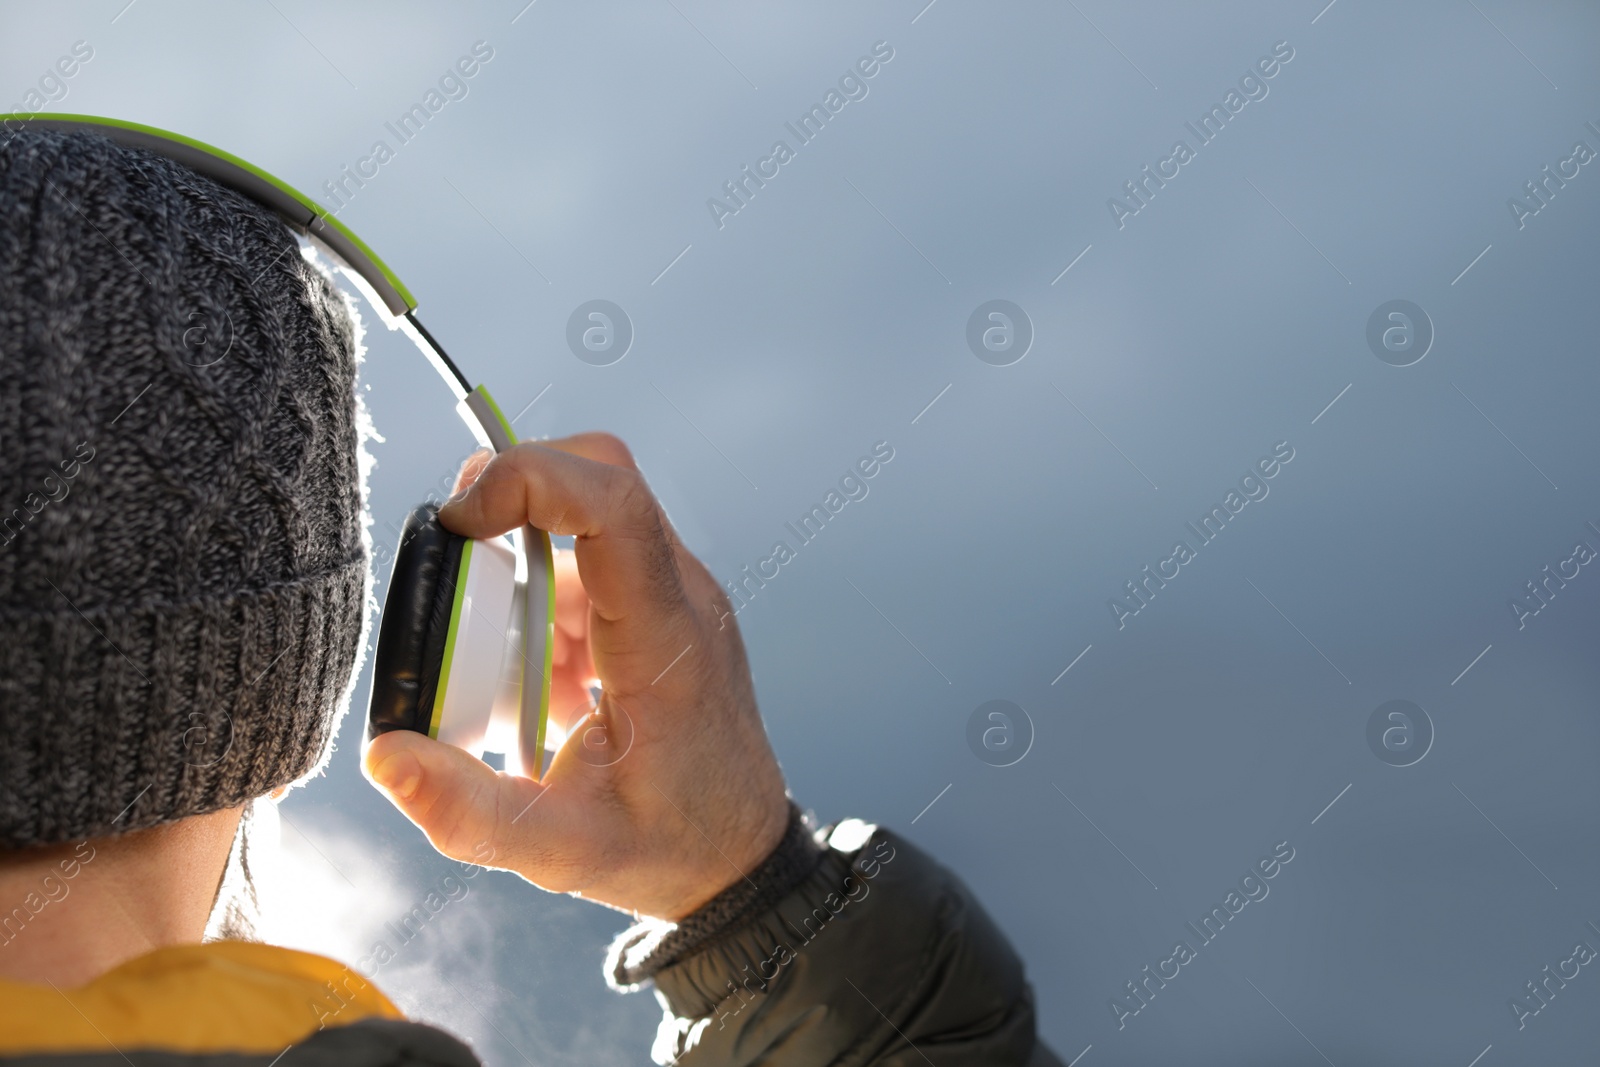 Photo of Man with headphones listening to music on blurred background, space for text